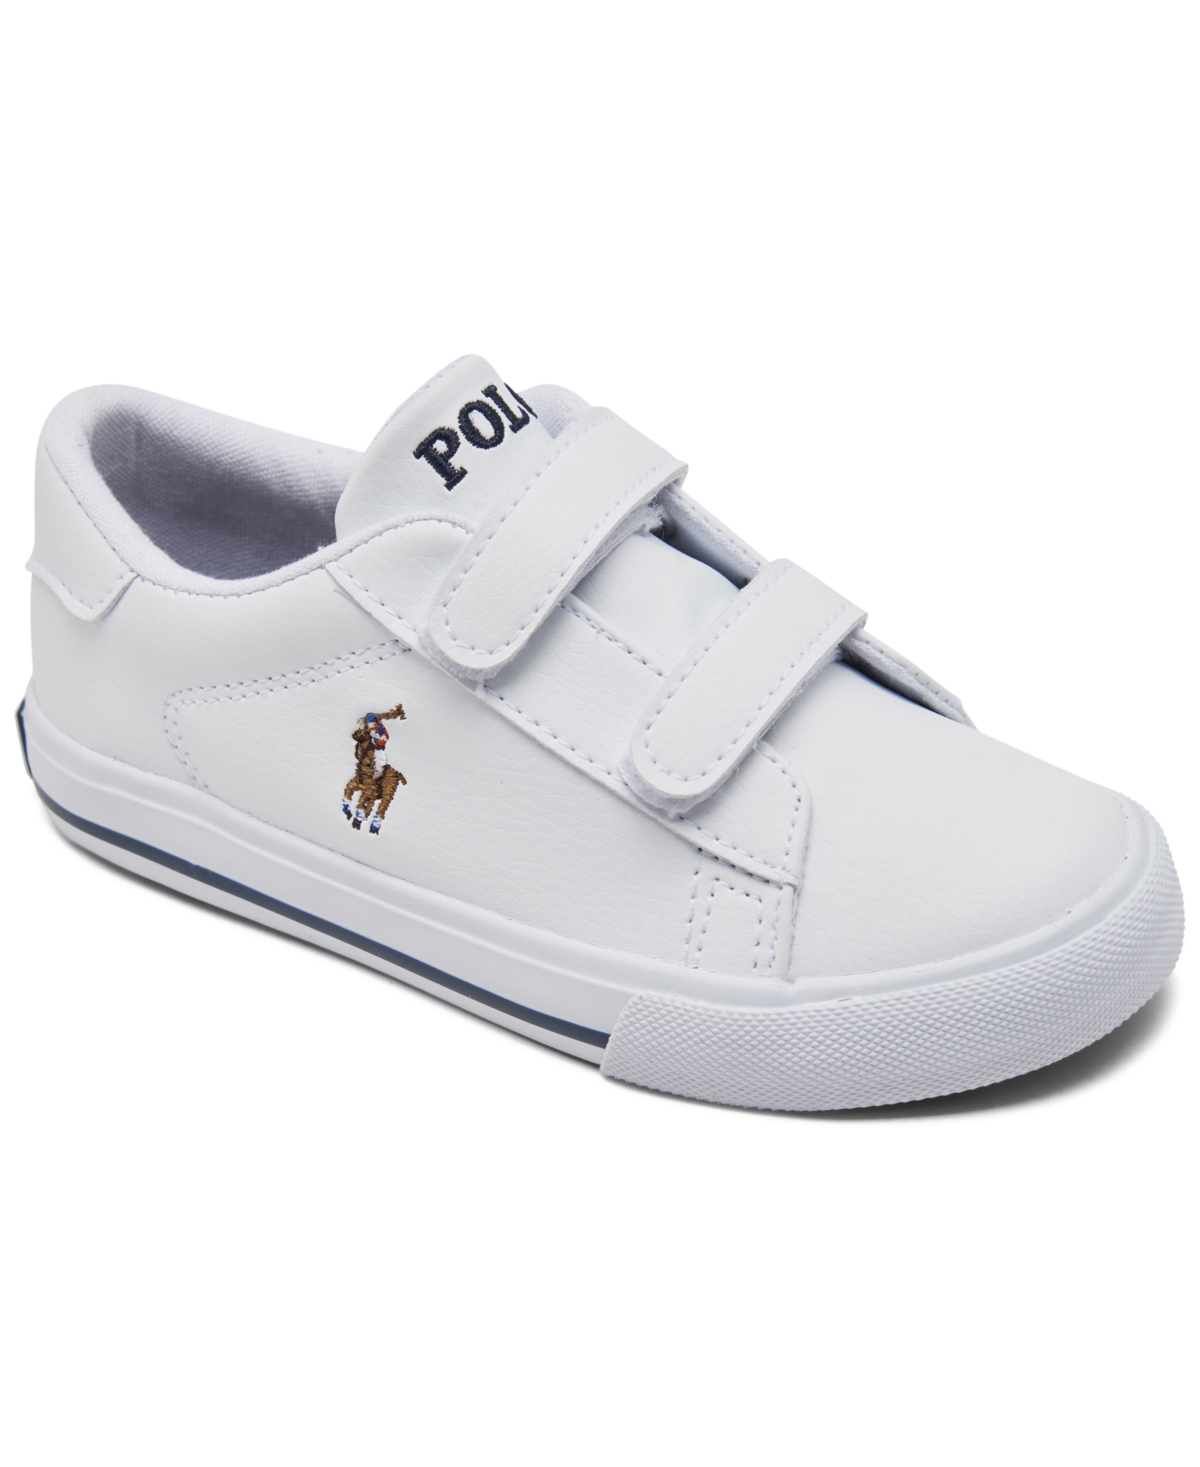 Polo Ralph Lauren Toddler Boys' Easten II EZ Casual Sneakers from Finish  Line & Reviews - Finish Line Kids' Shoes - Kids - Macy's